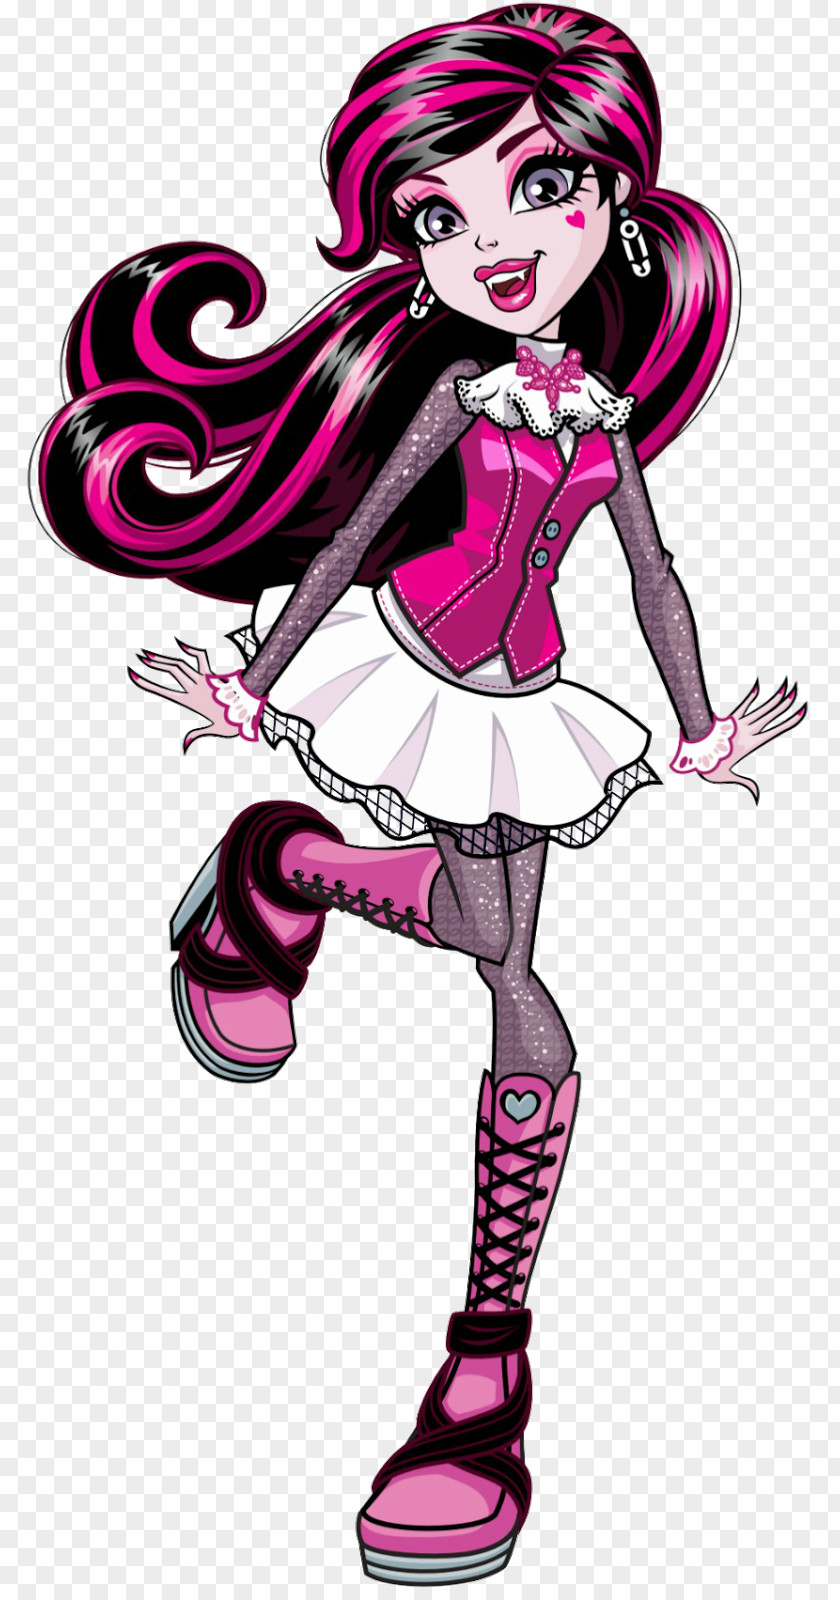 Doll Monster High Draculaura Frankie Stein Clawdeen Wolf Cleo DeNile PNG